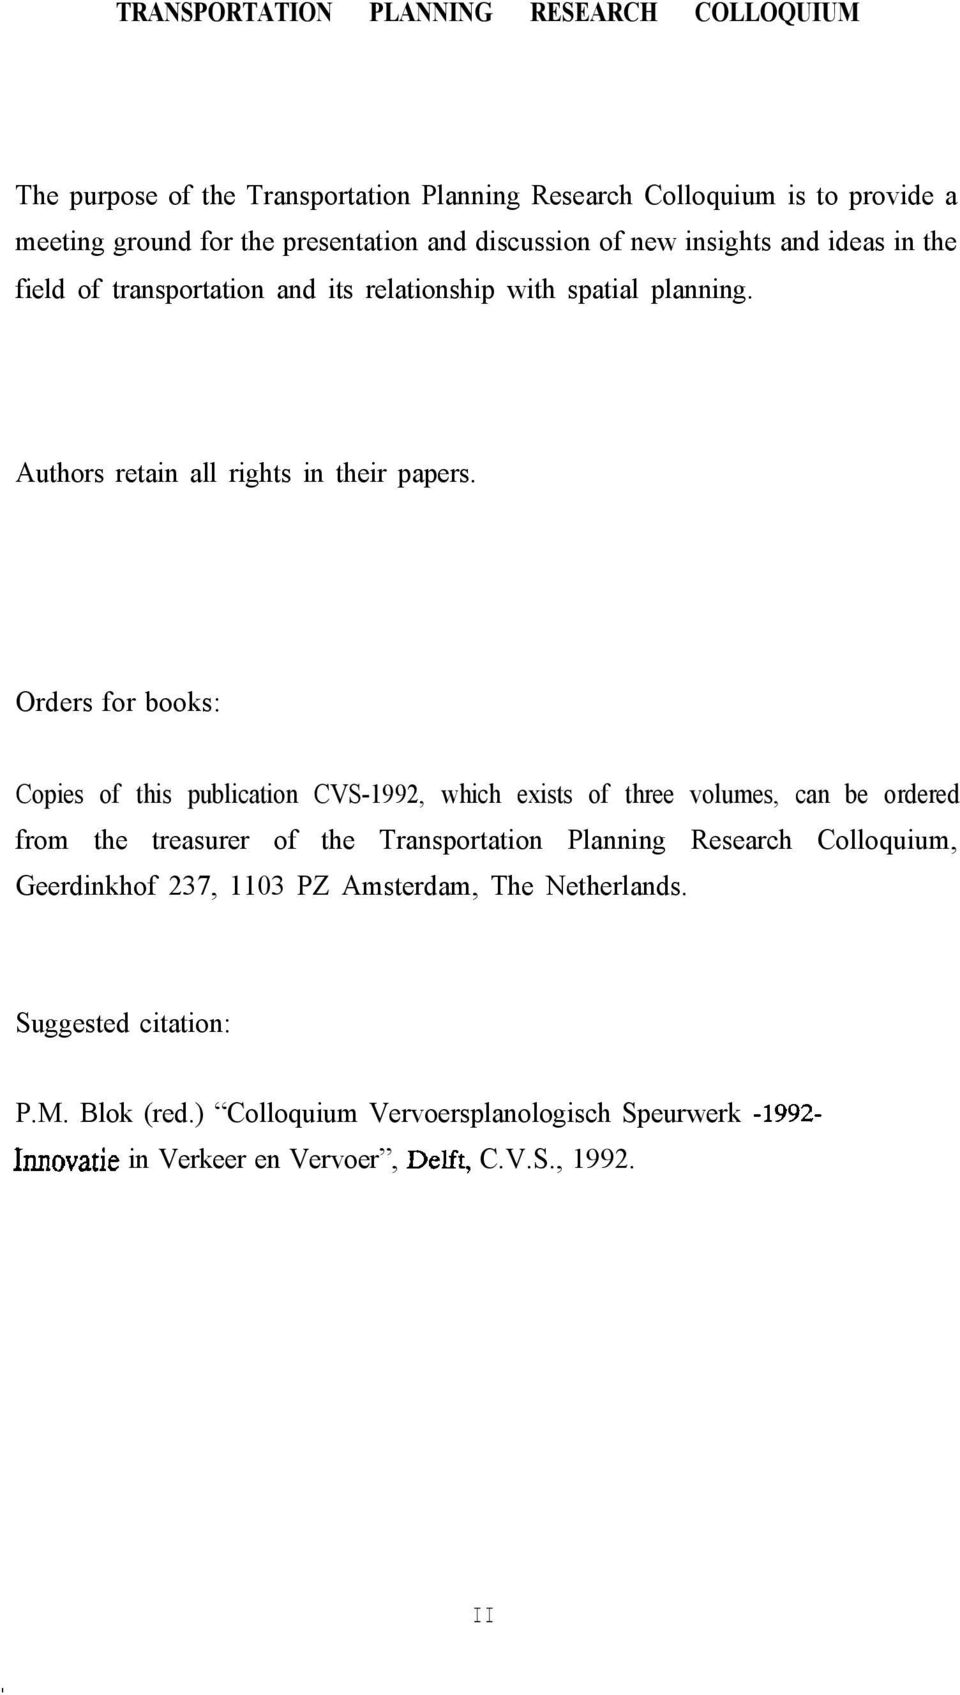 Orders for books: Copies of this publication CVS-1992, which exists of three volumes, can be ordered from the treasurer of the Transportation Planning Research Colloquium,